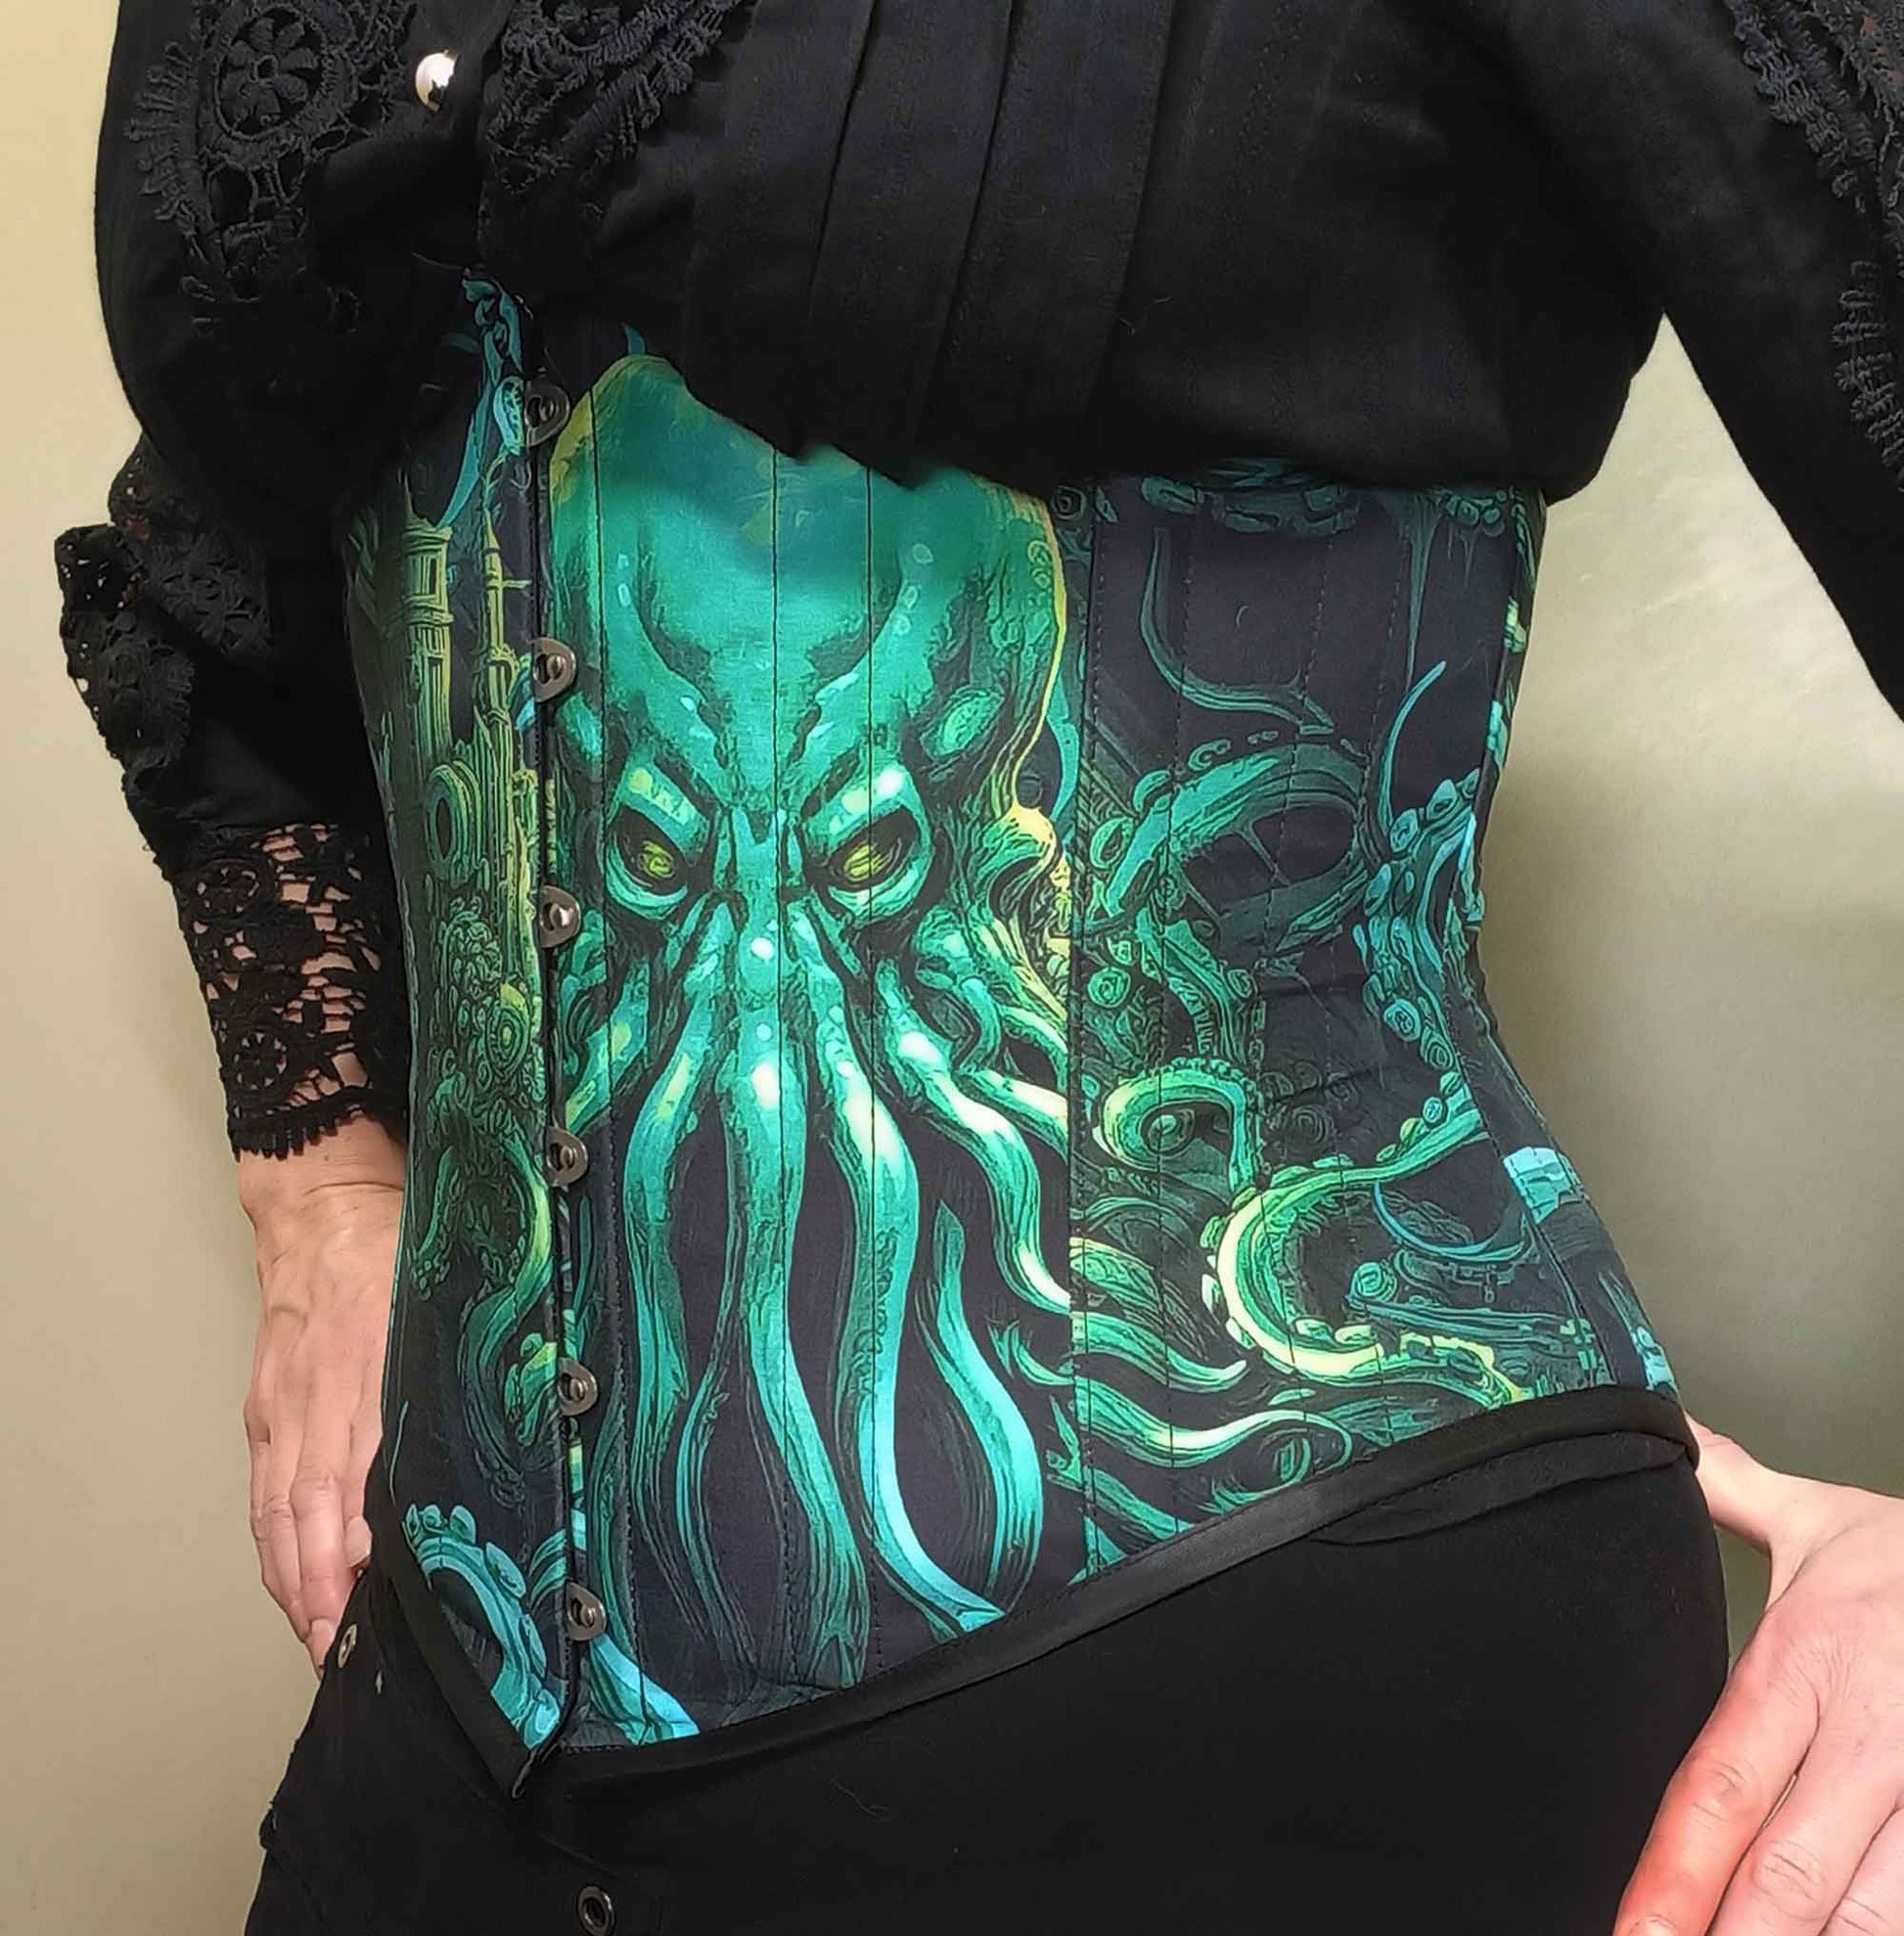 Call of Cthulhu under bust corset in vibrant and dark greens and blacks featuring the Lovecraft sea monster on an Australian made custom sized corset at Gallery Serpentine